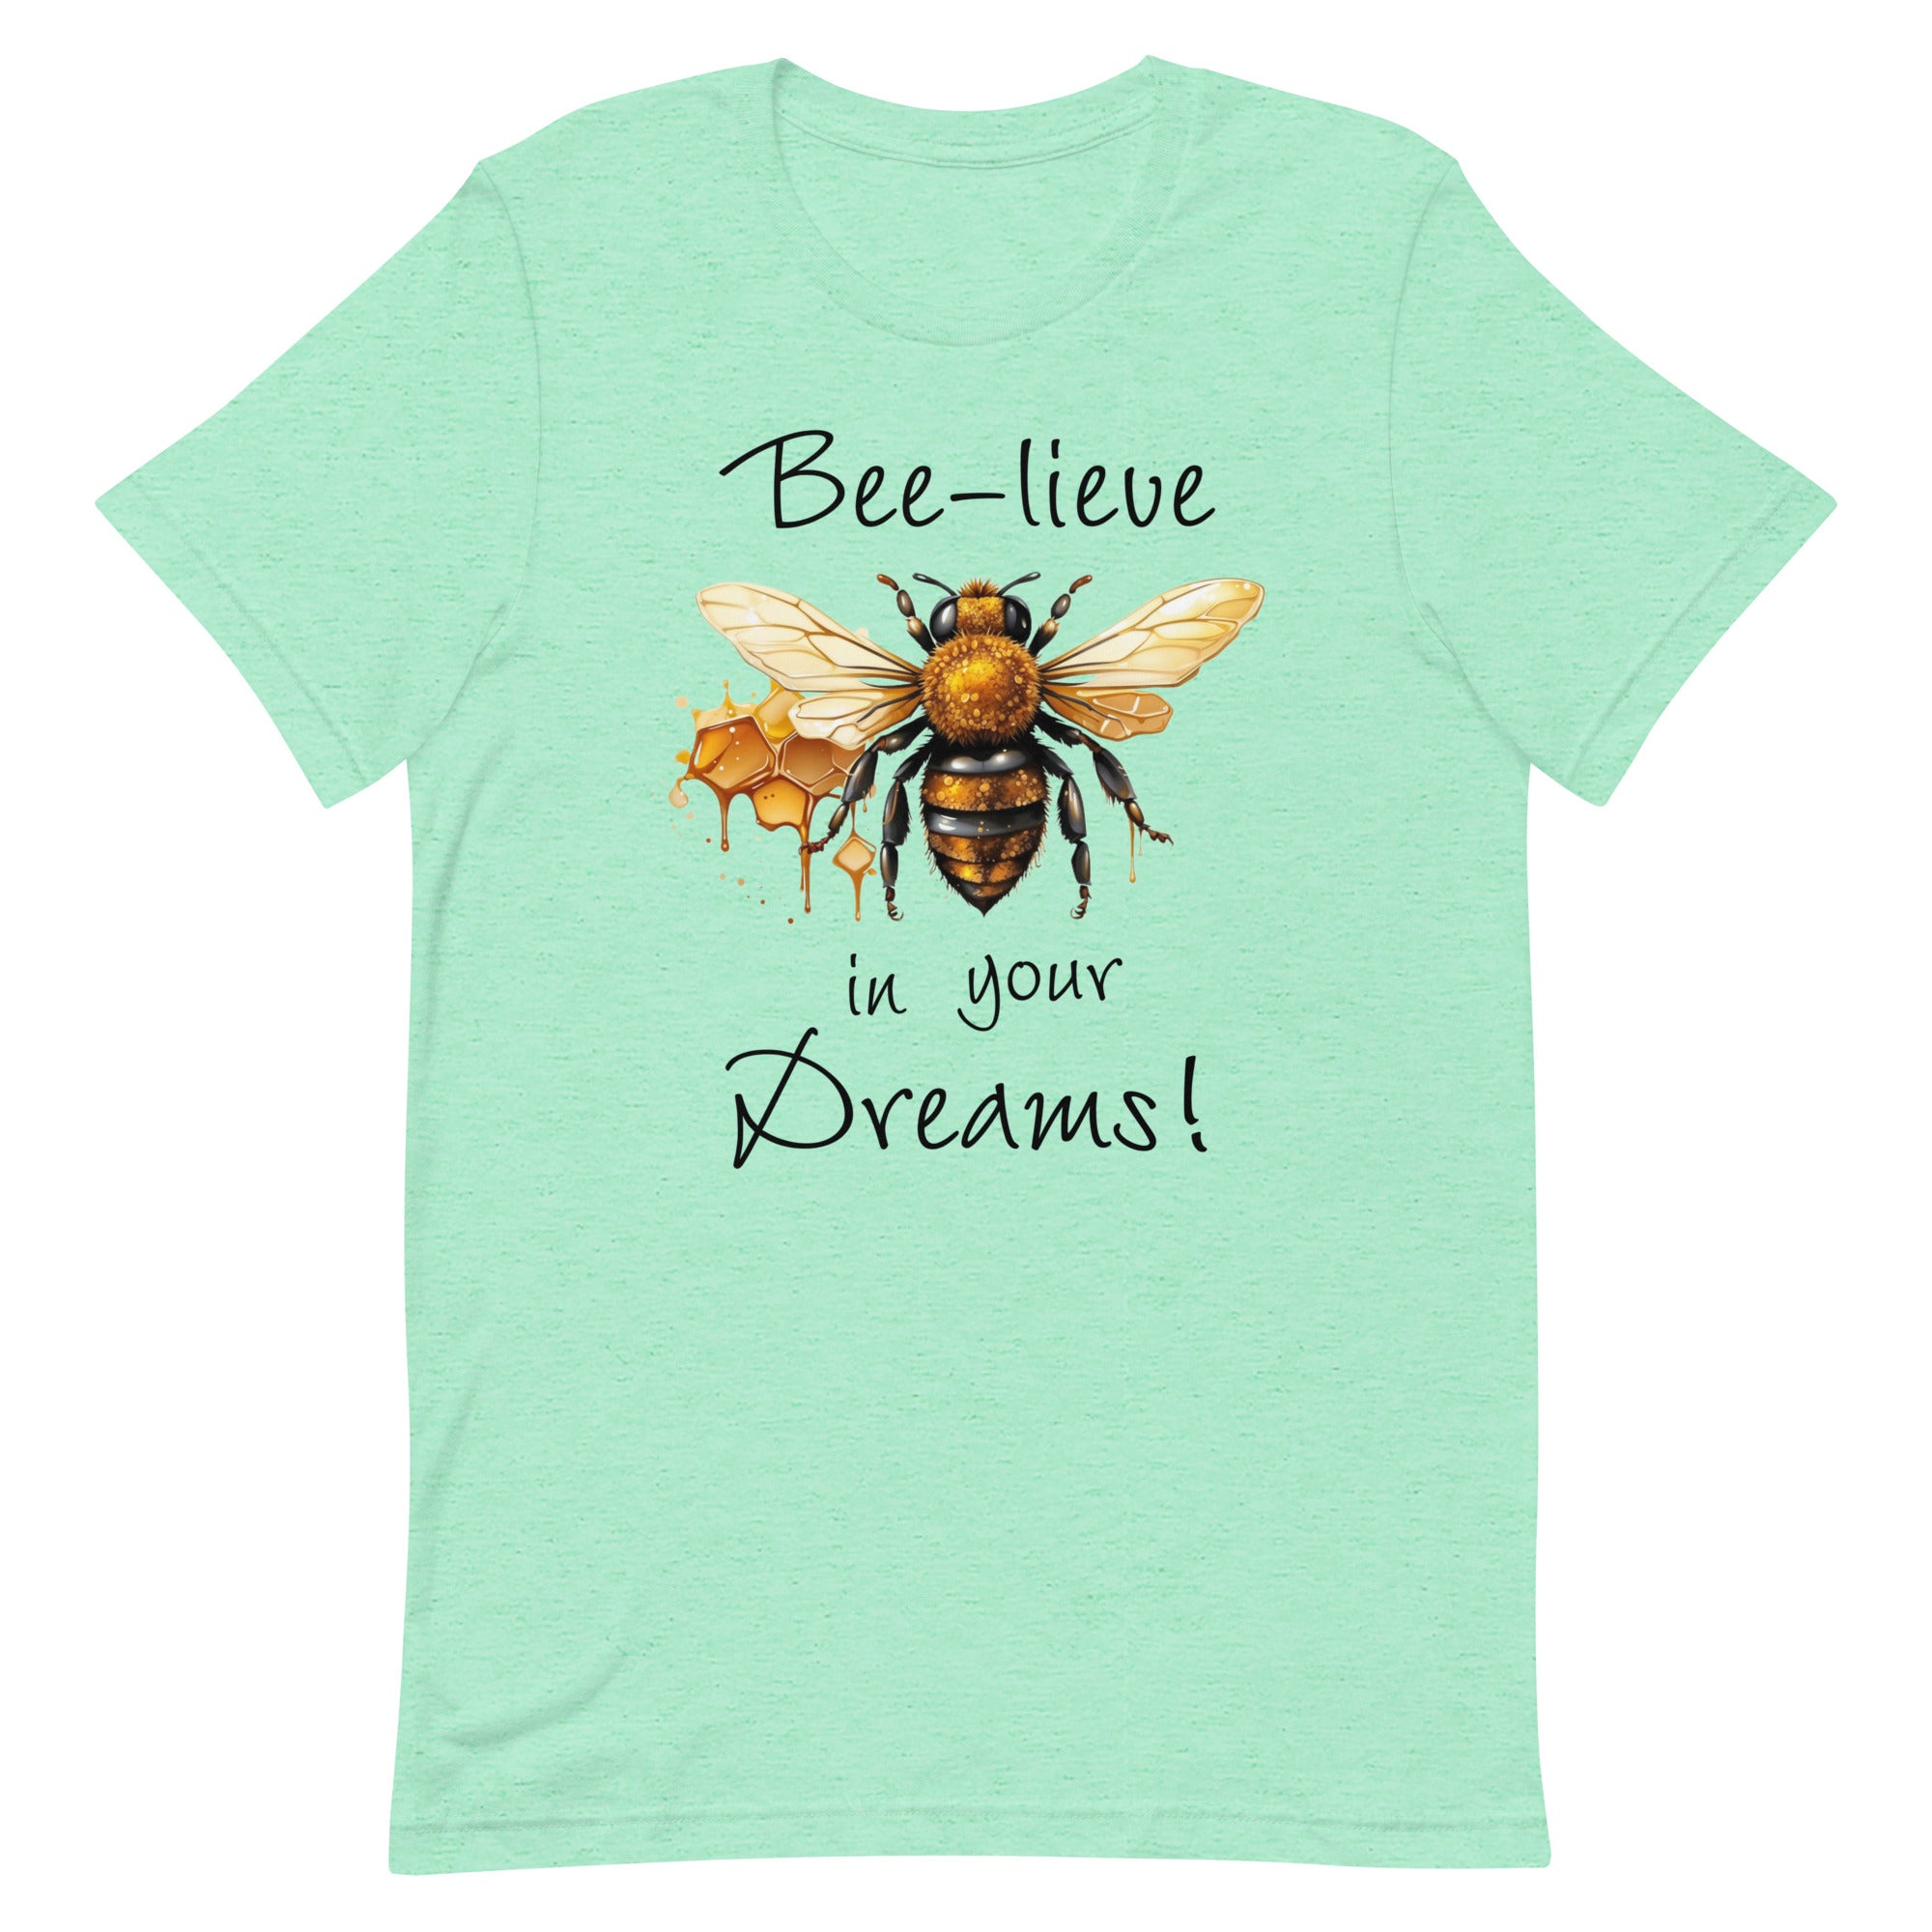 Bee-lieve in Your Dreams T-Shirt, Gift for Bee Lovers Heather Mint L S M XL DenBox